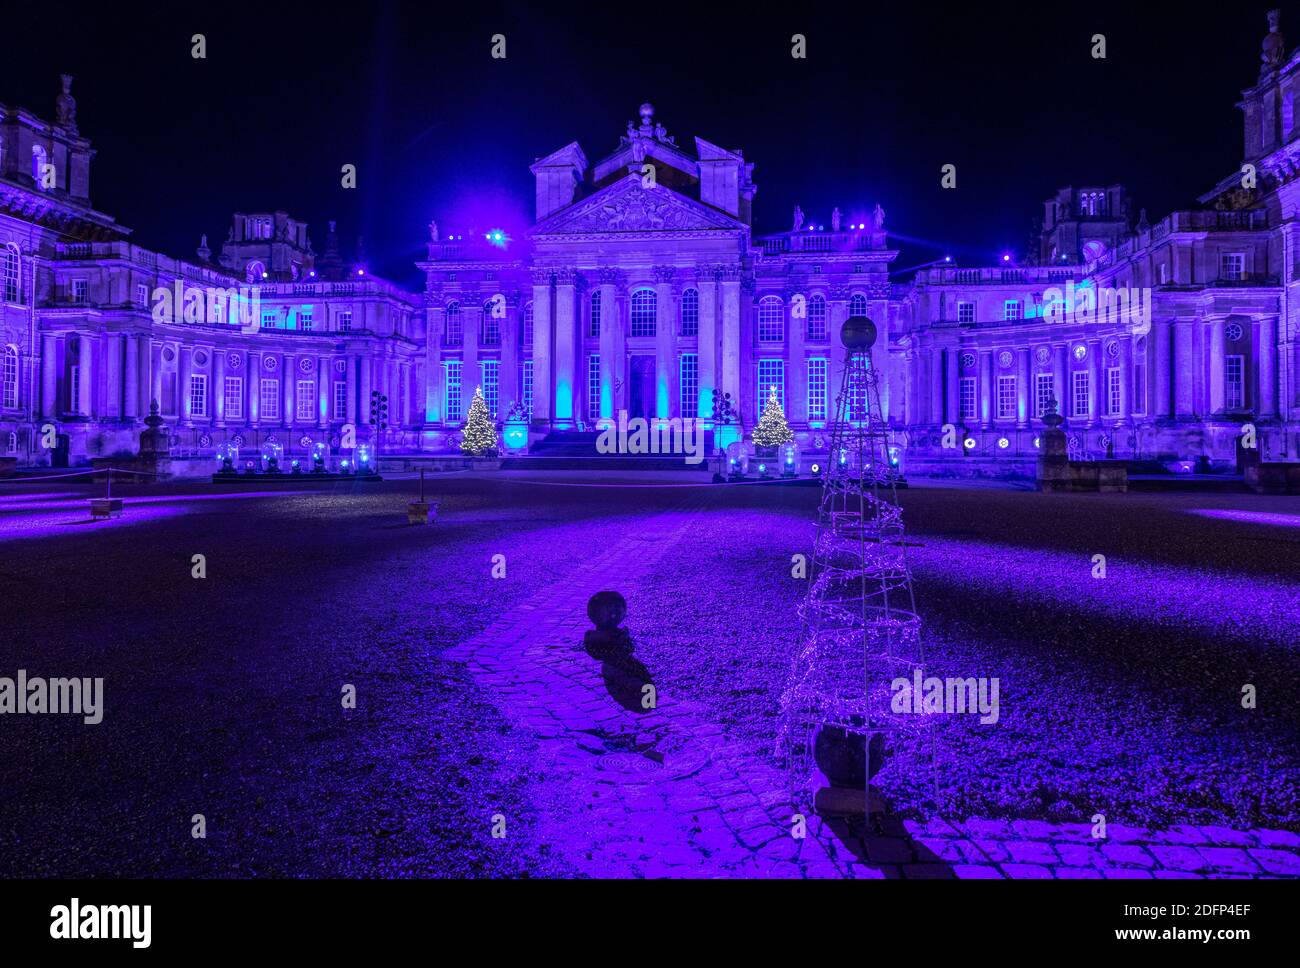 Blenheim Palace illuminated for Christmas as part of the Blenheim Christmas lights trail. Stock Photo